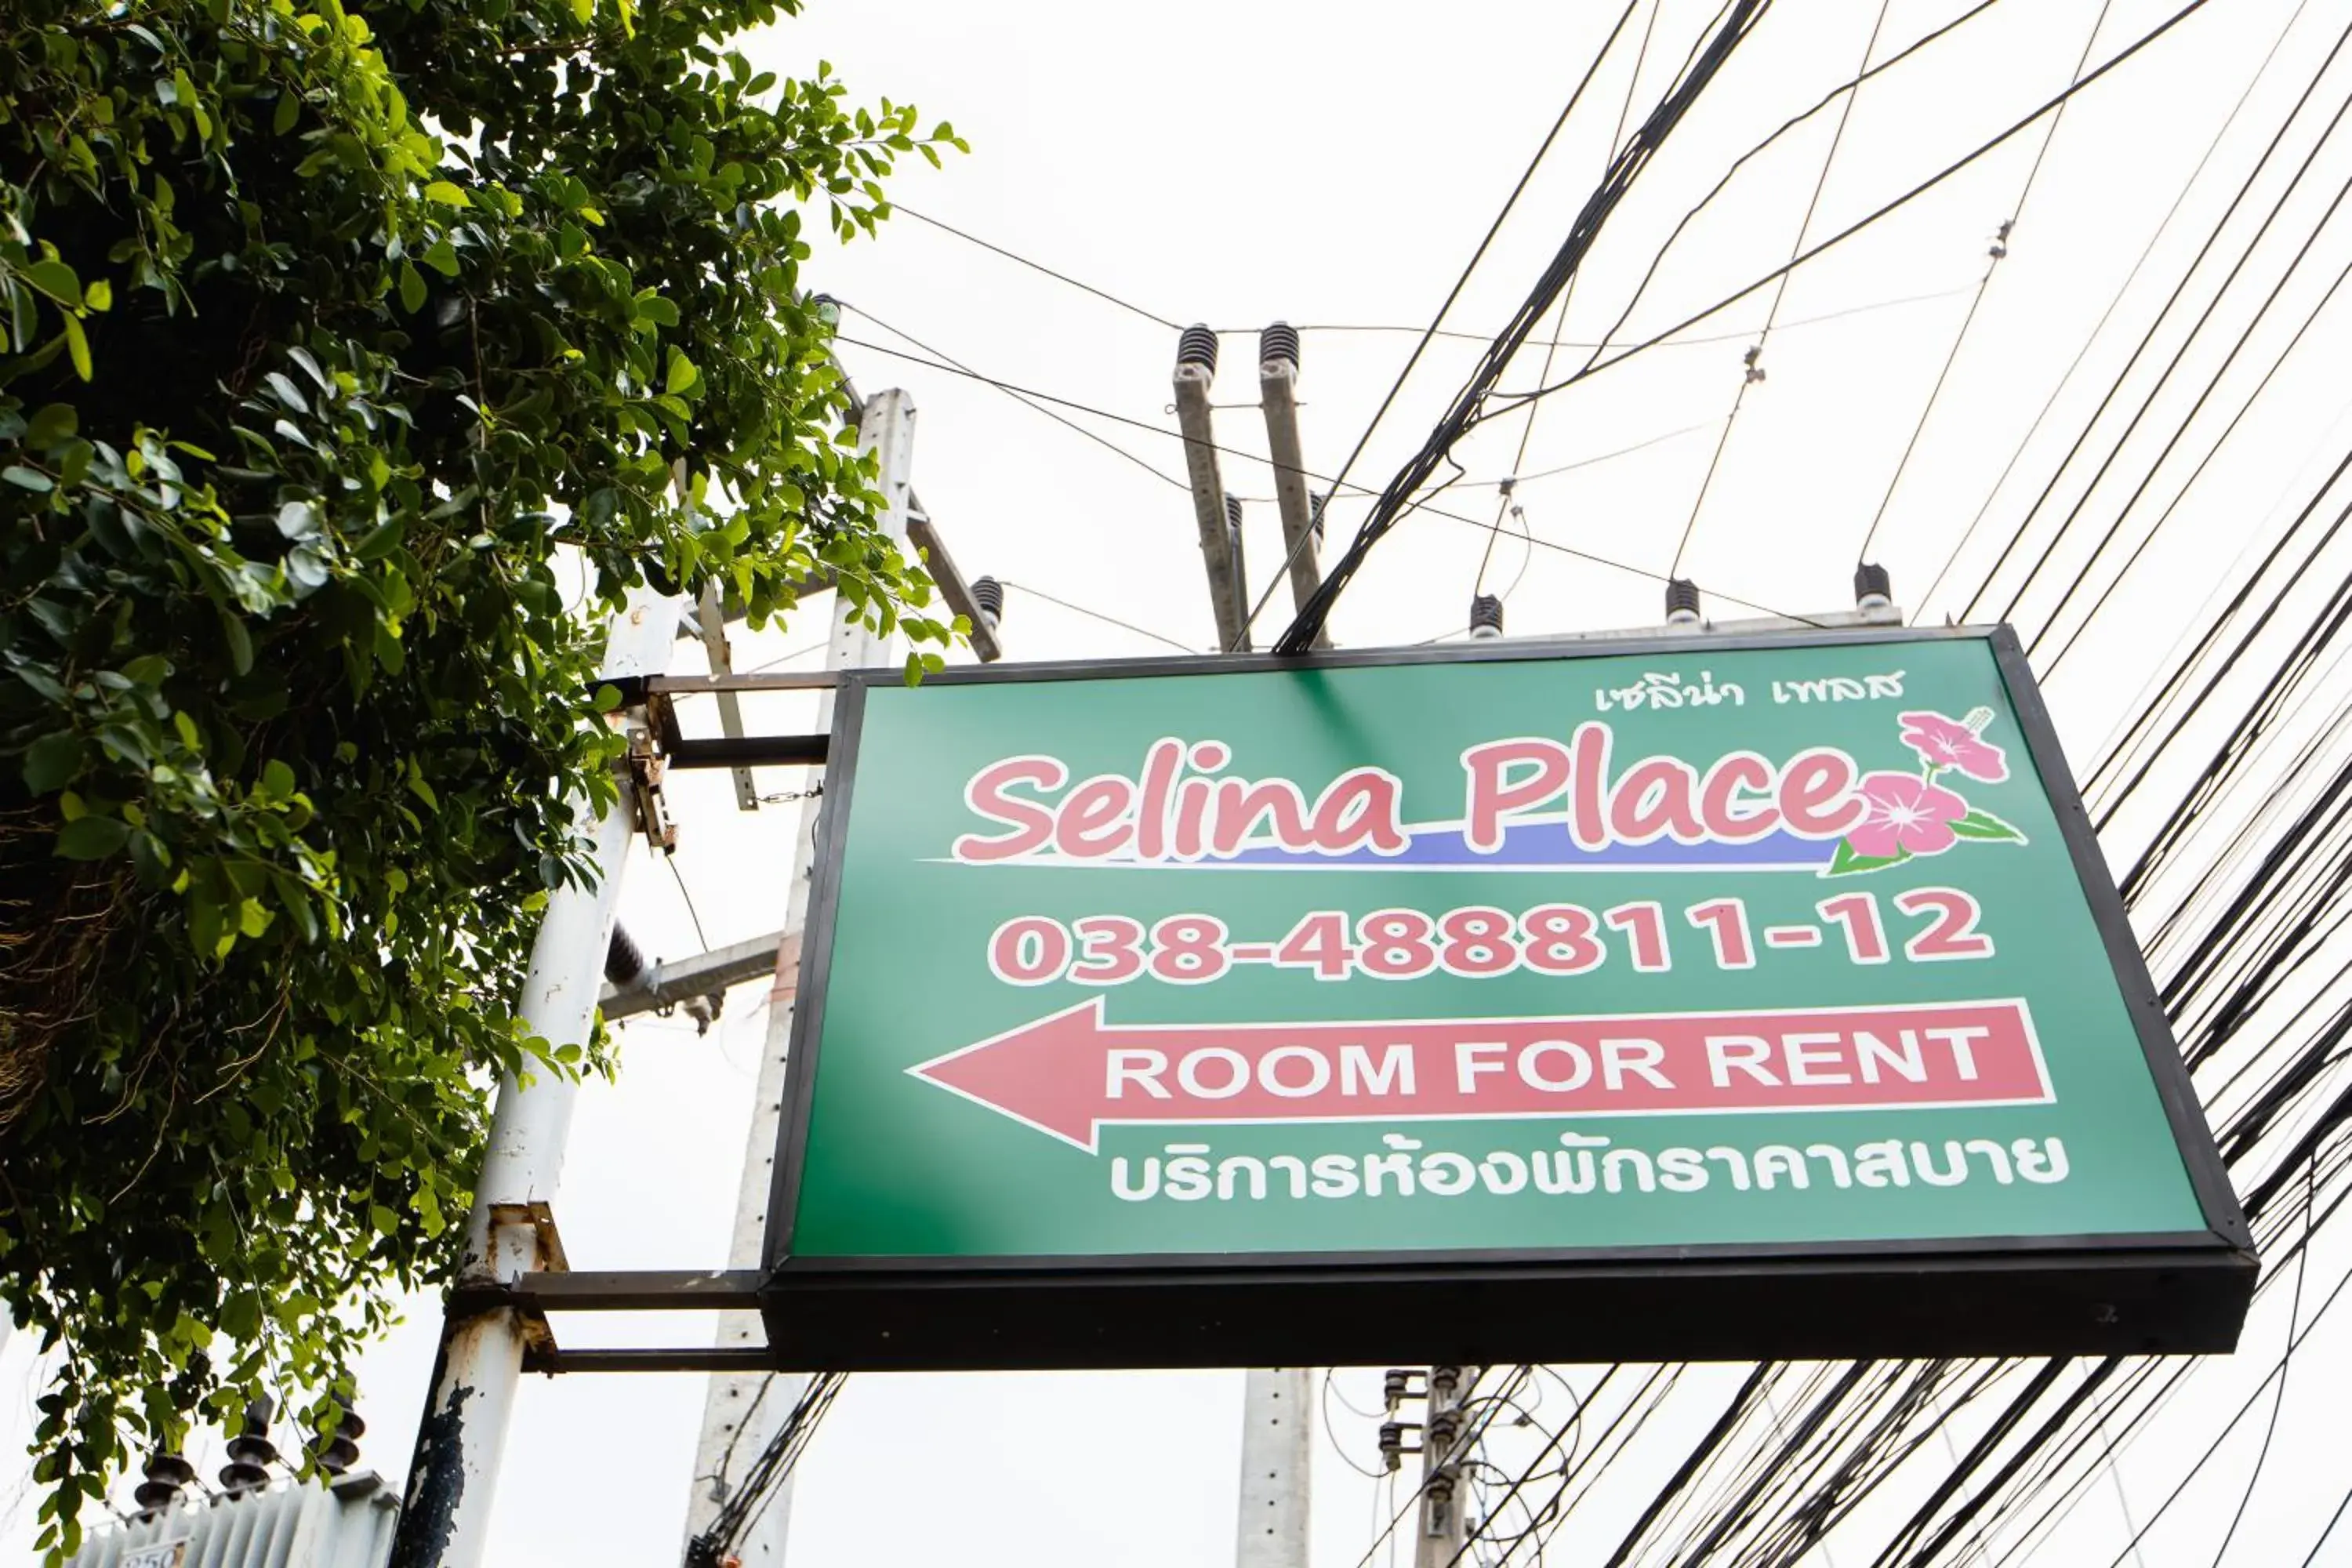 Property logo or sign in Selina Place